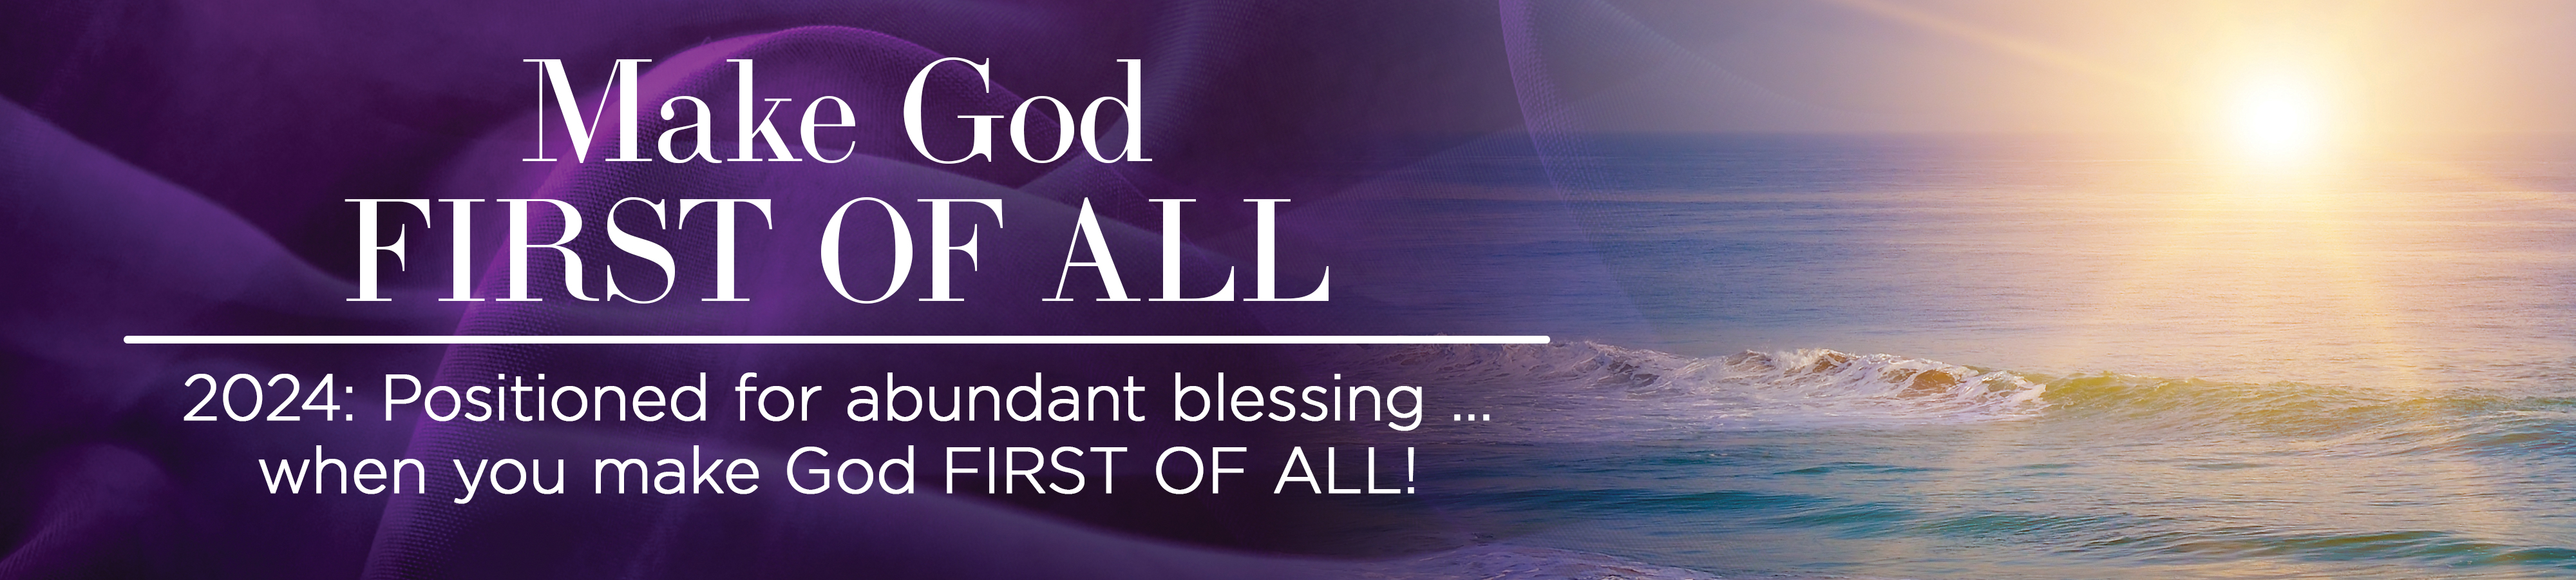 Make God First of All | 2024: Positioned for Abundant Blessing... When You Make God FIRST OF ALL!